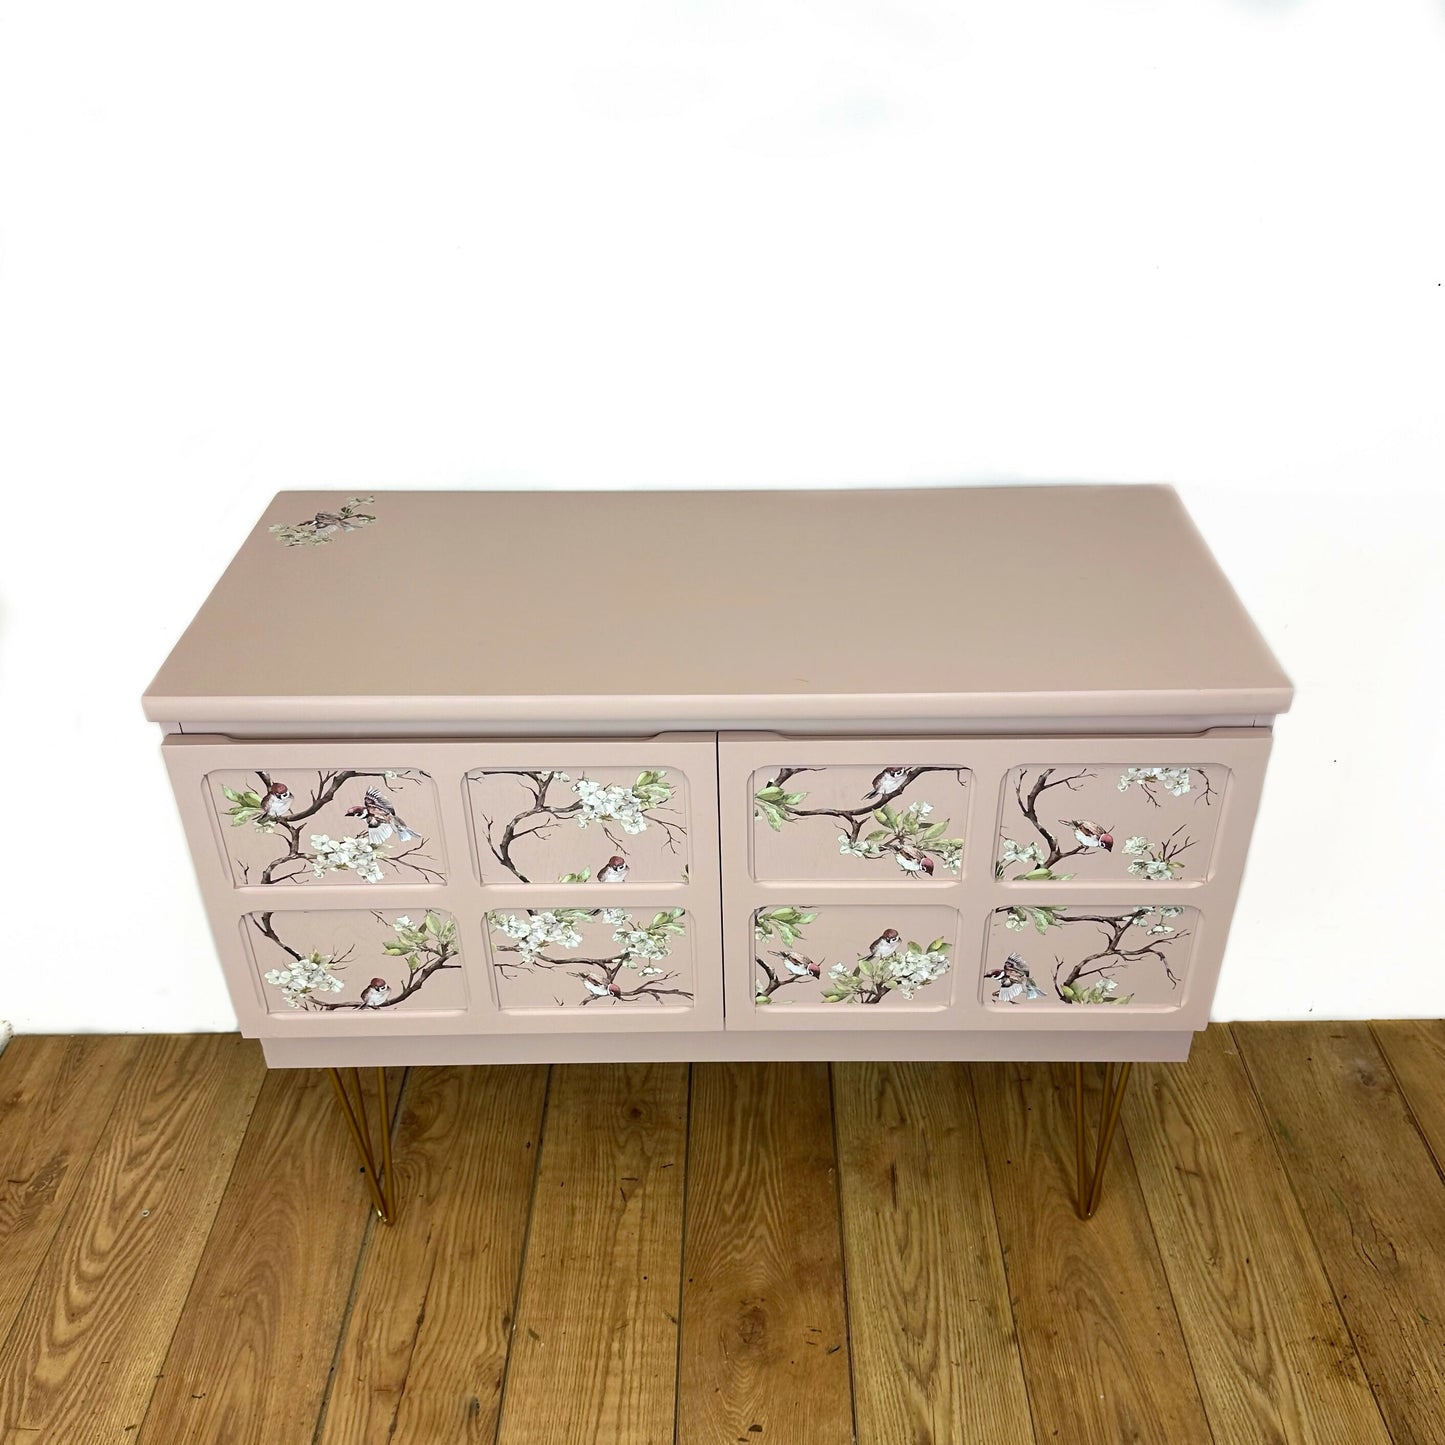 Refurbished Nathan sideboard, TV unit, pale dusky pink, blossom flight, birds, country cottage, mid century, vintage console table, cupboard